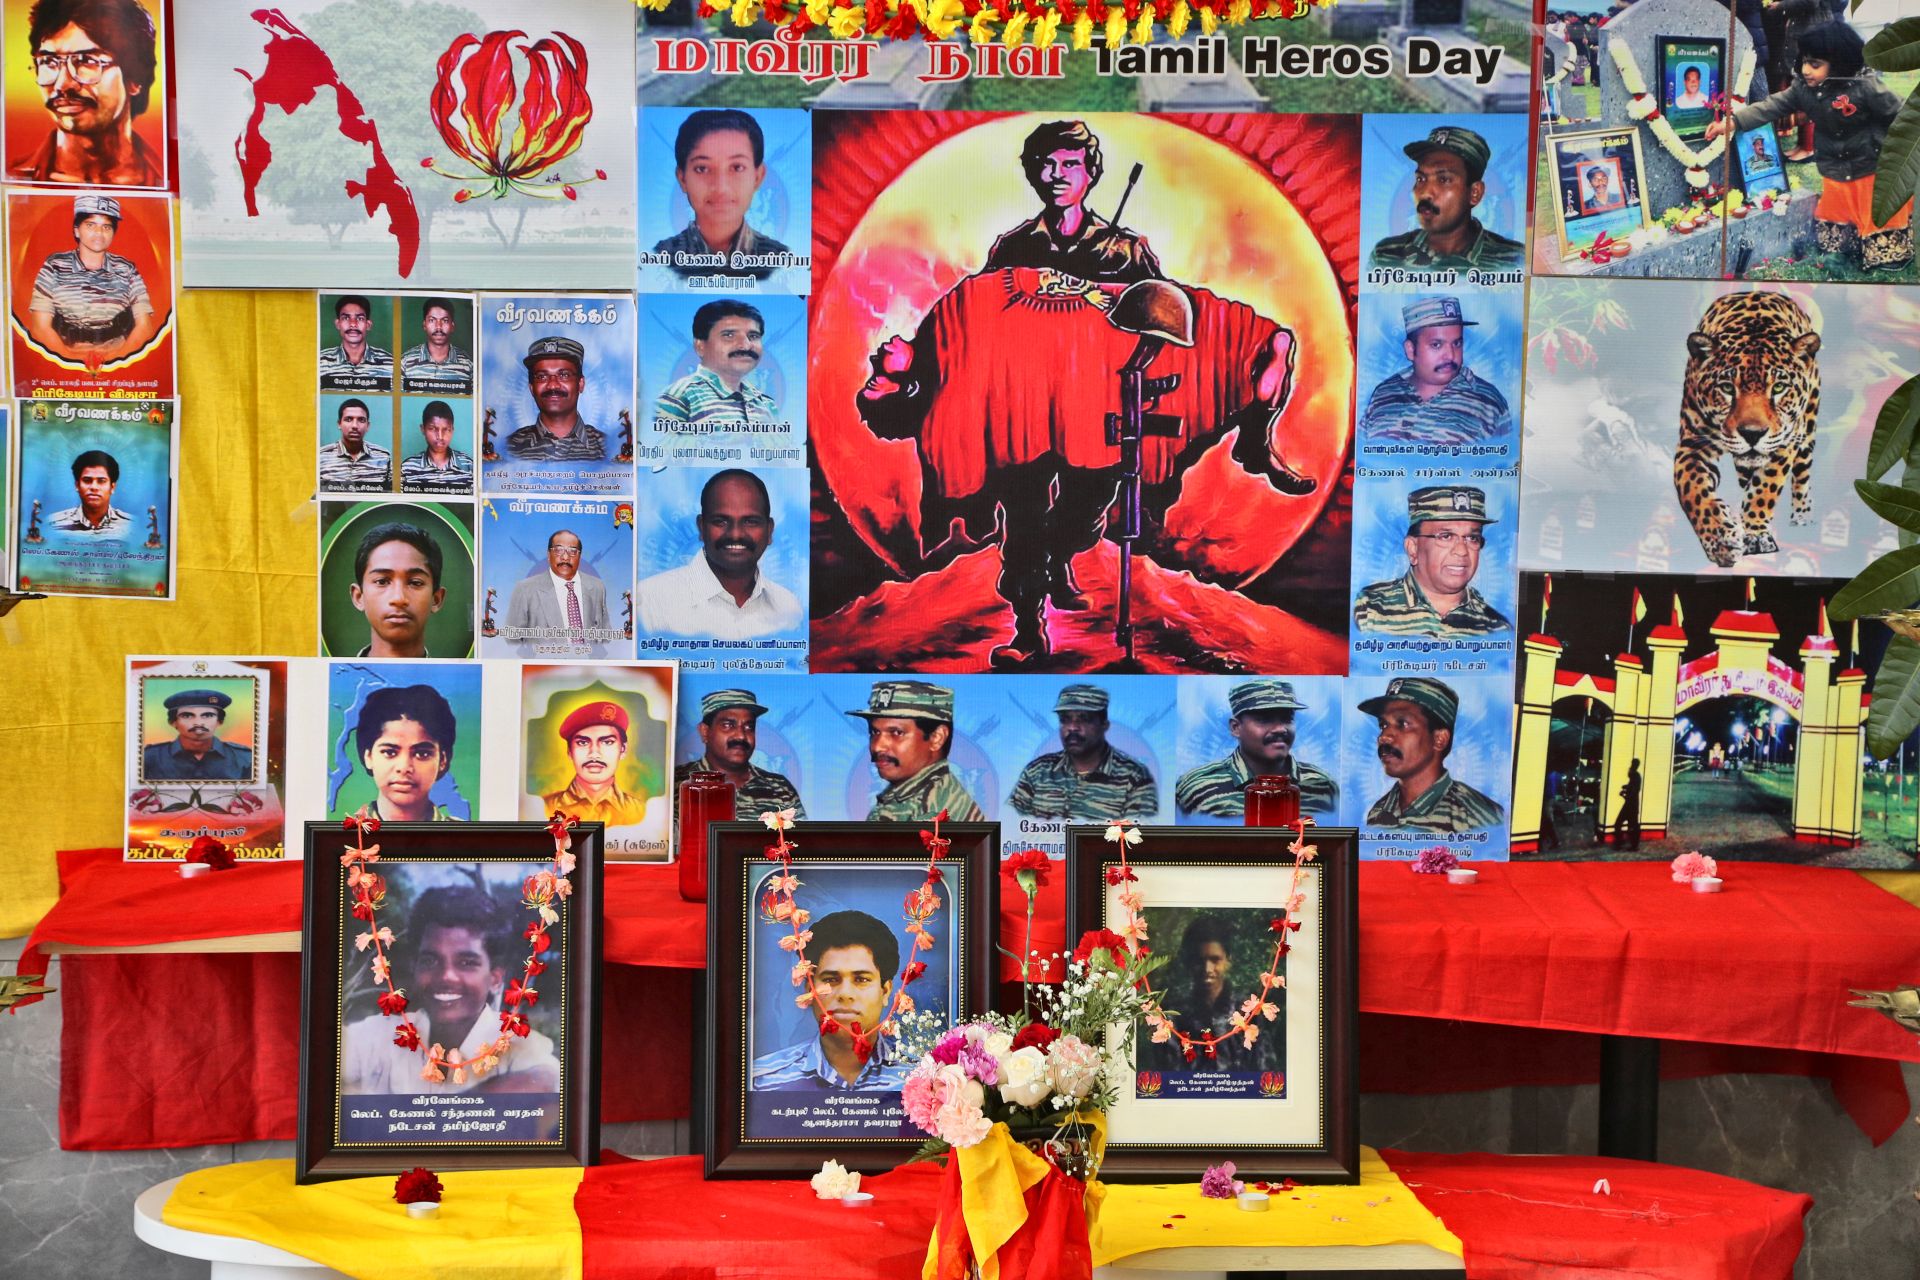 In Sri Lanka, Tamils Are Divided over the LTTE’s Legacy